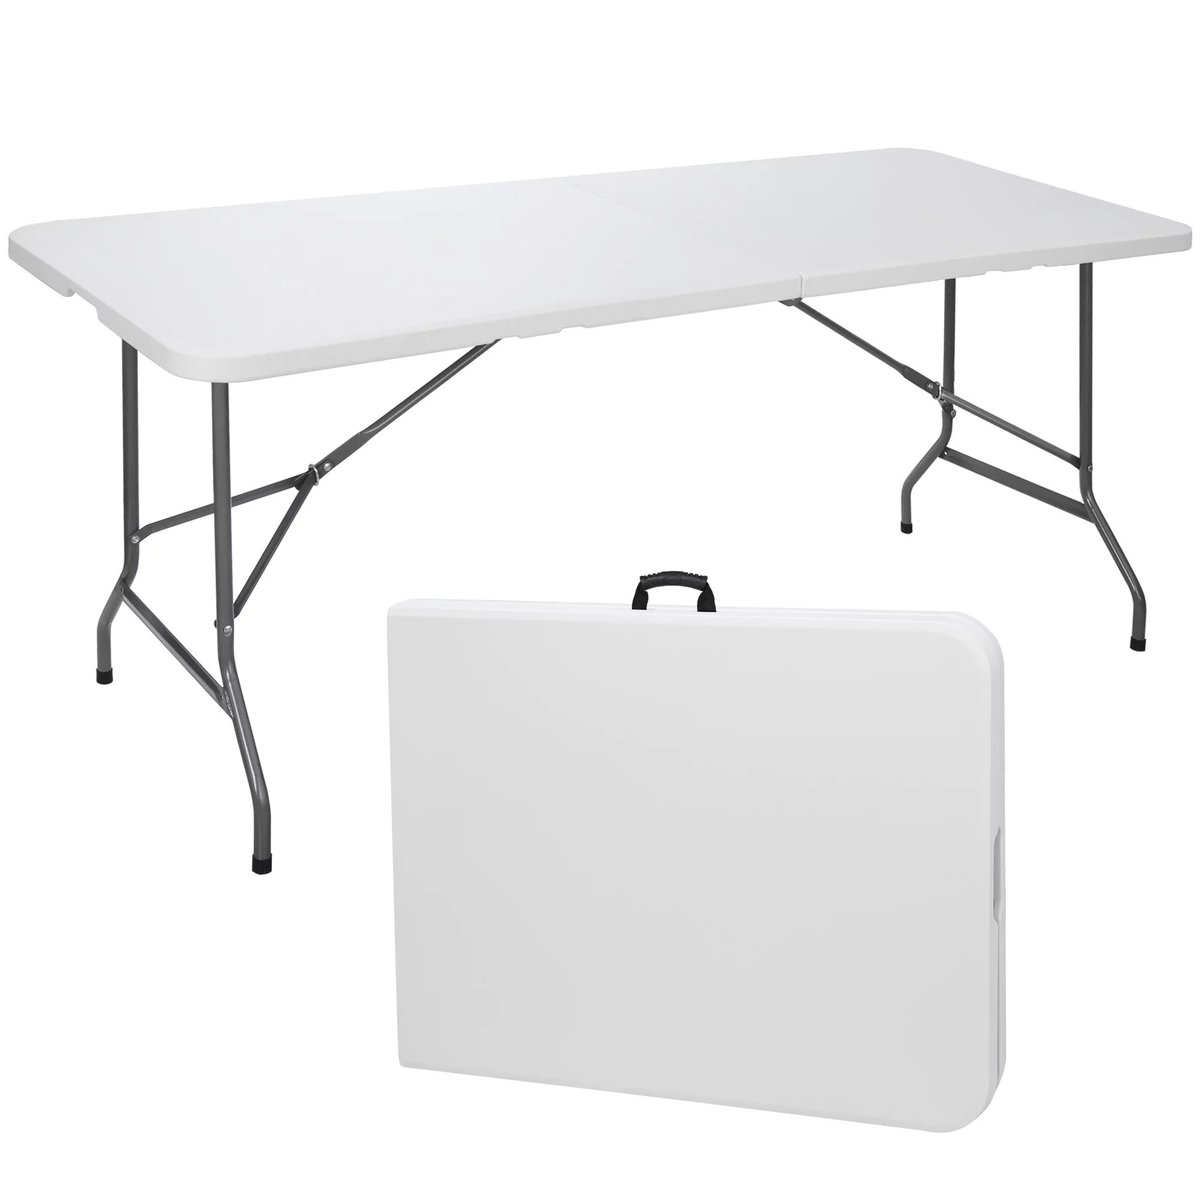 6ft Folding Game Table Portable Camping Table for Picnic Beach 71' x 27' 📷 PRlCE Drop 📷 + Lowest I could FIND! mavely.app.link/e/kJ40DPga0Ab ad #camping #party #deals #beach #vacation